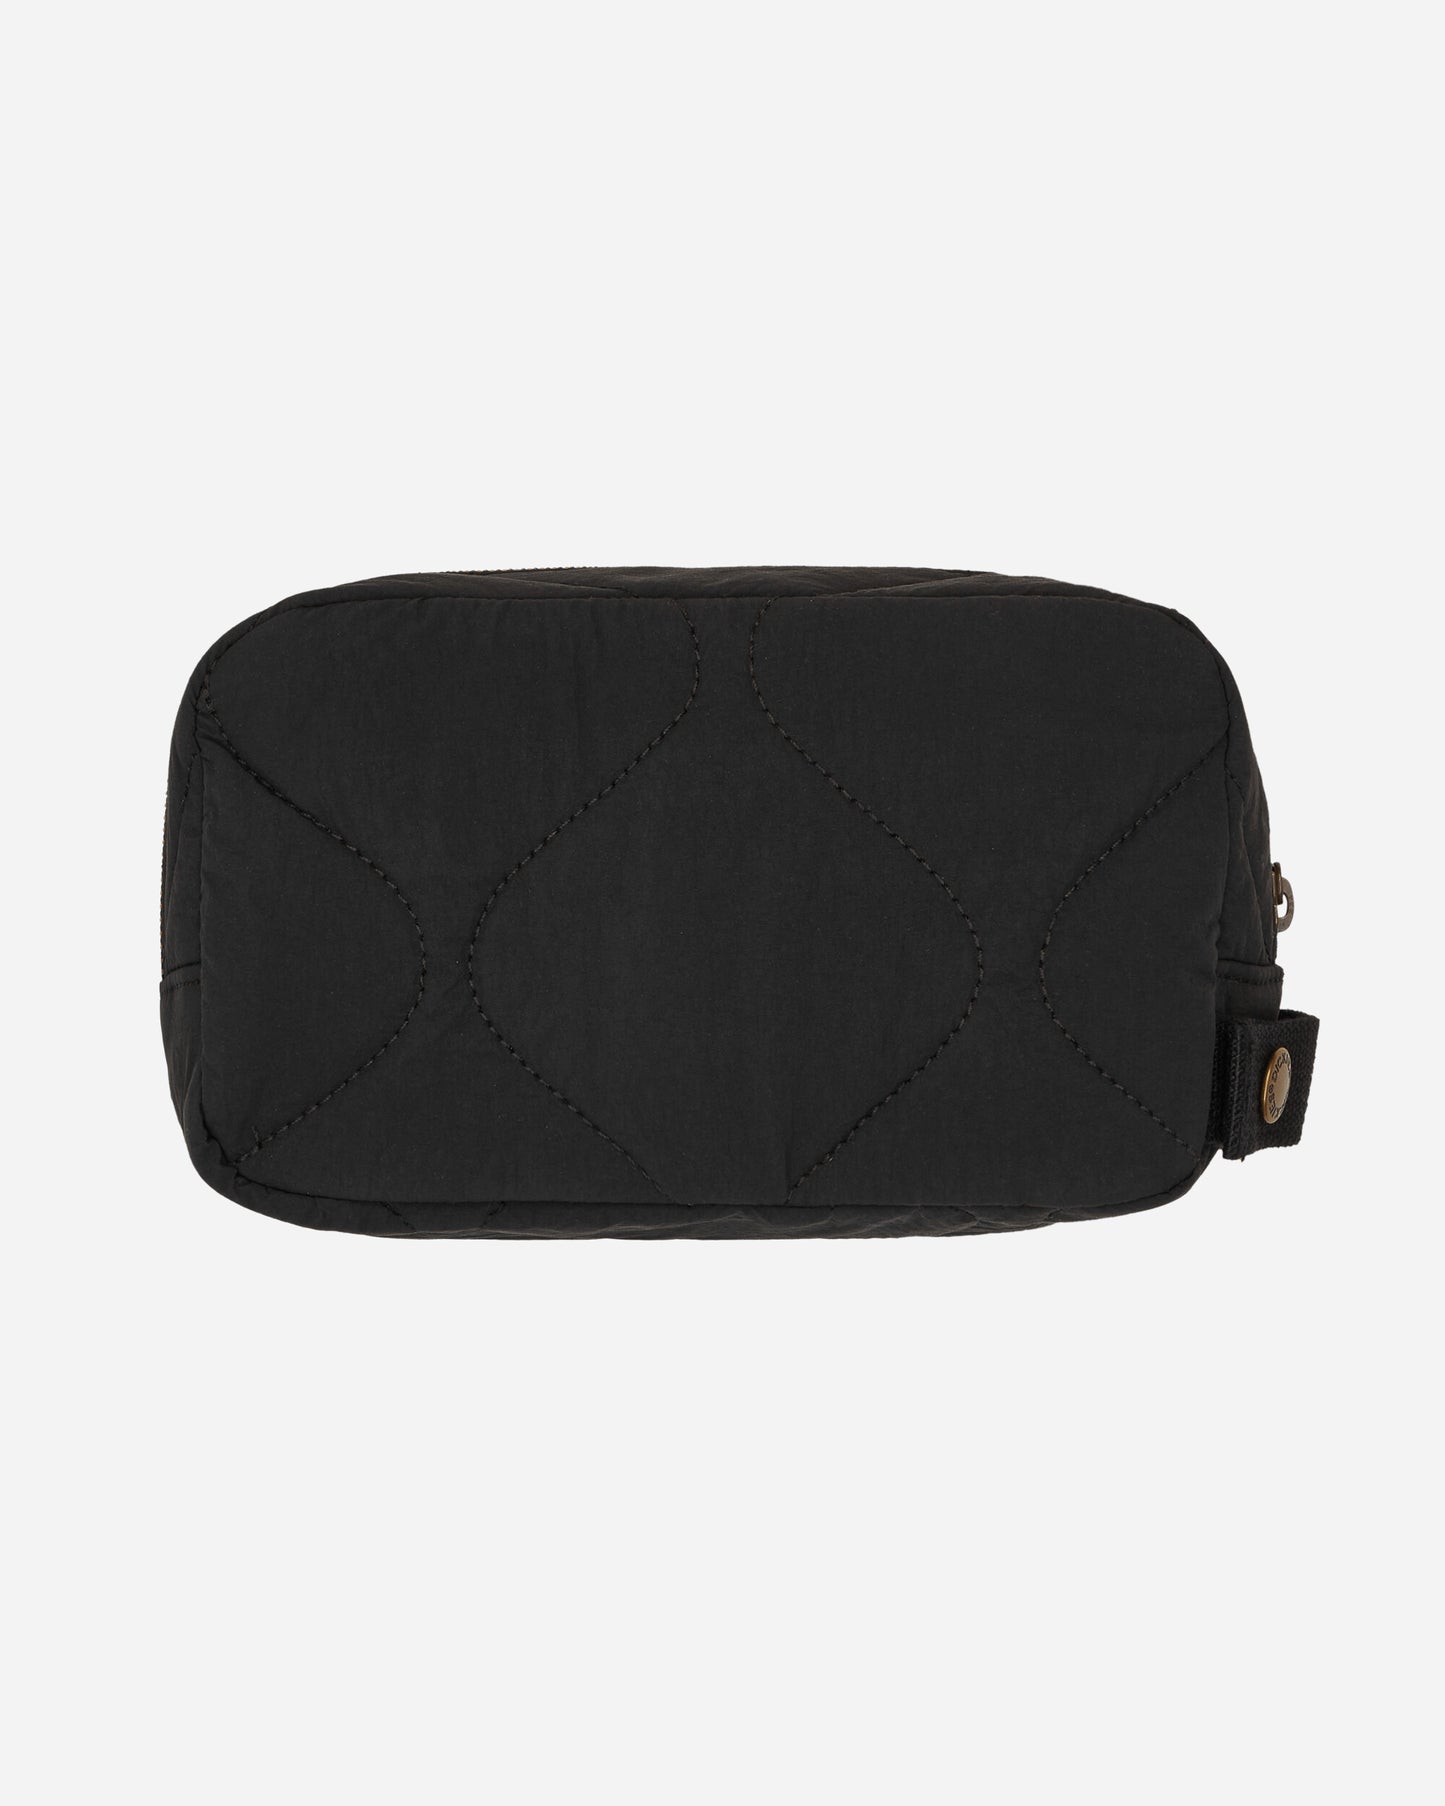 Dickies Thorsby Pouch Black Bags and Backpacks Pouches DK0A4YGA BLK1